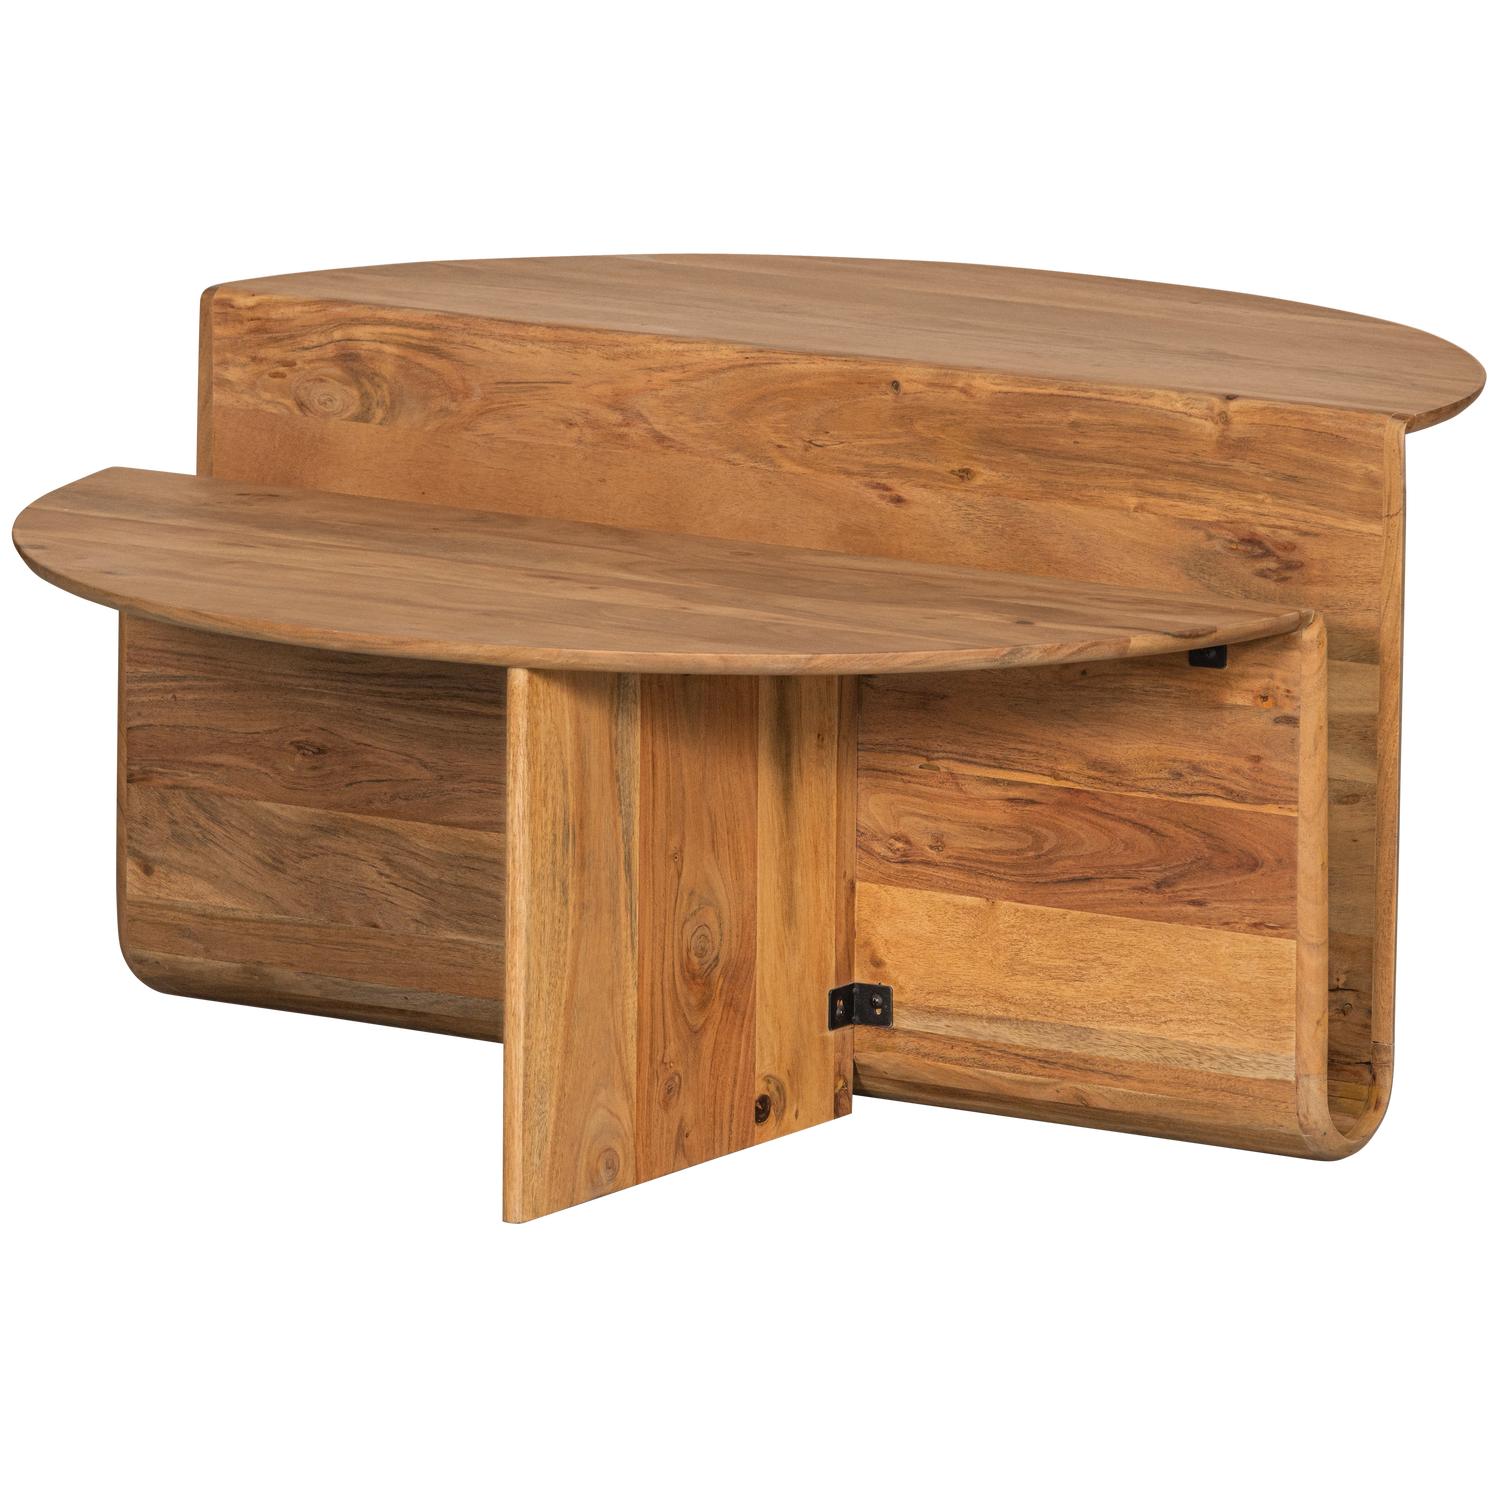 JAWS COFFEE TABLE WOOD NATURAL